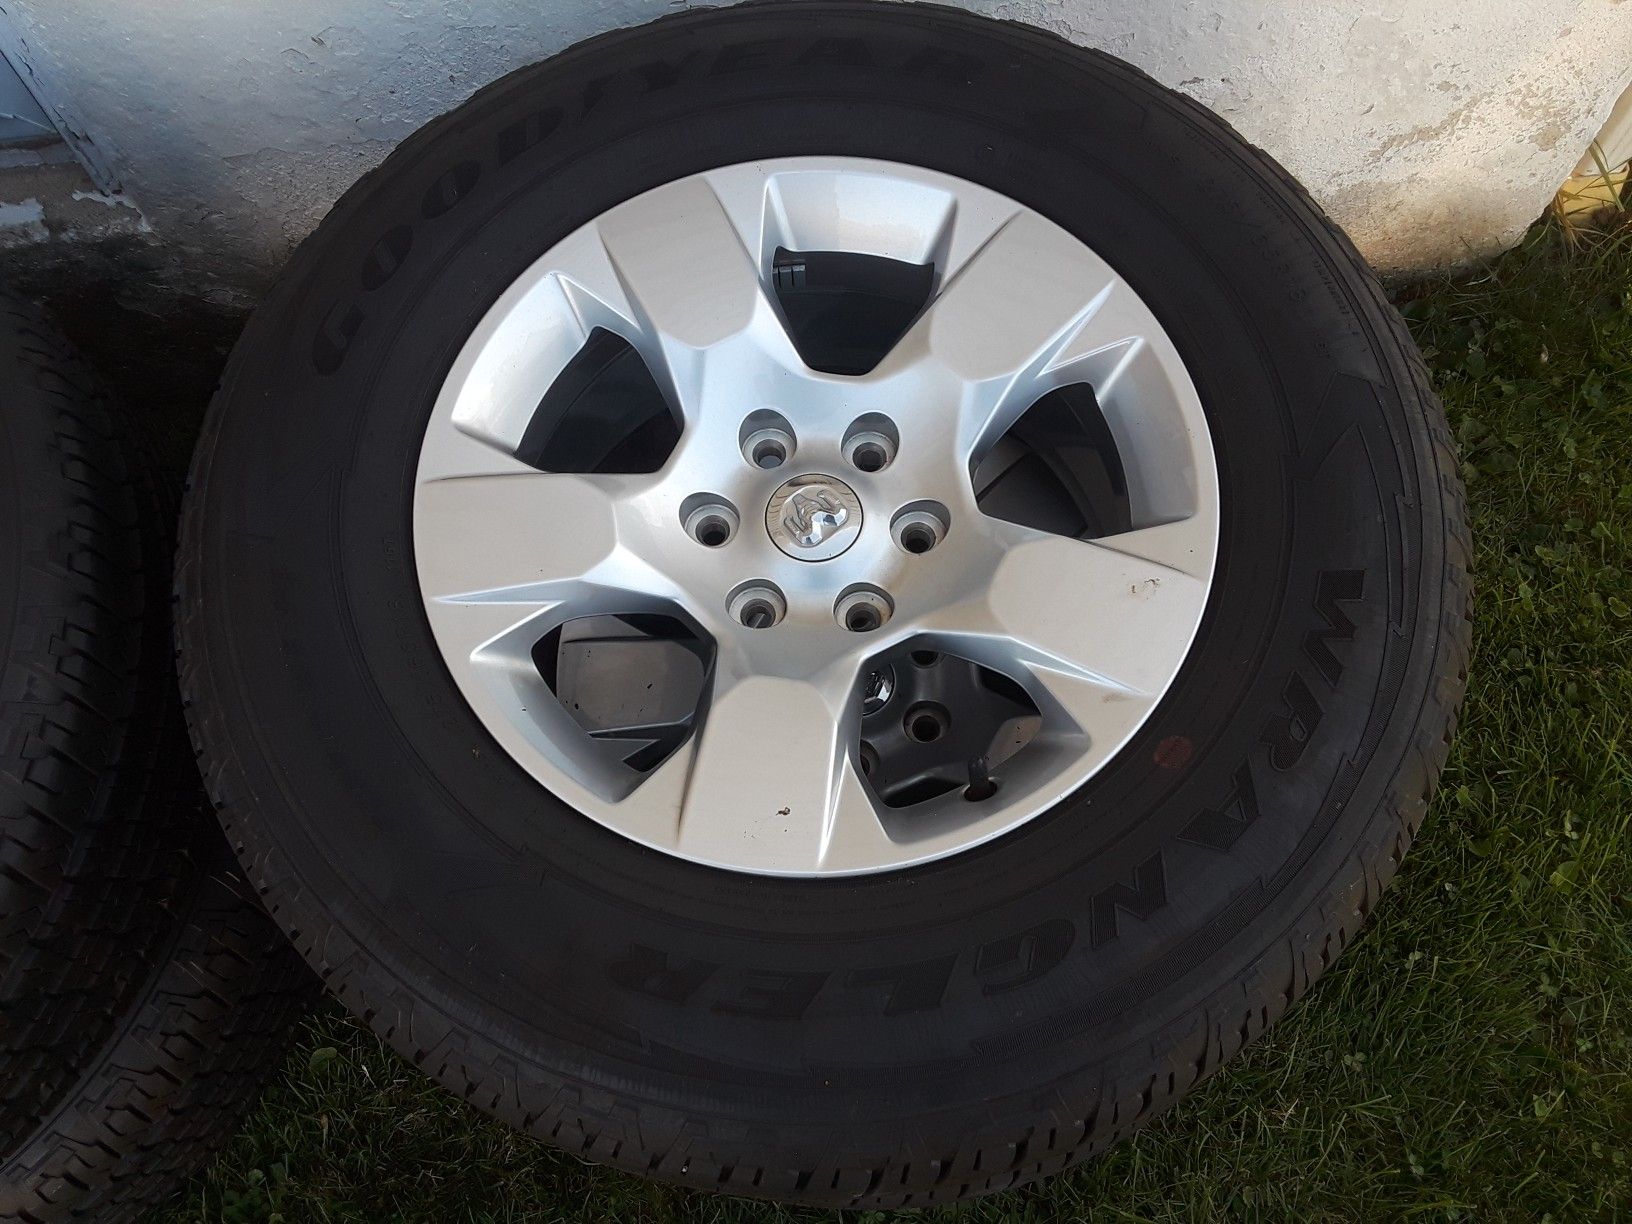 2019 dodge ram 1500 tires and rims